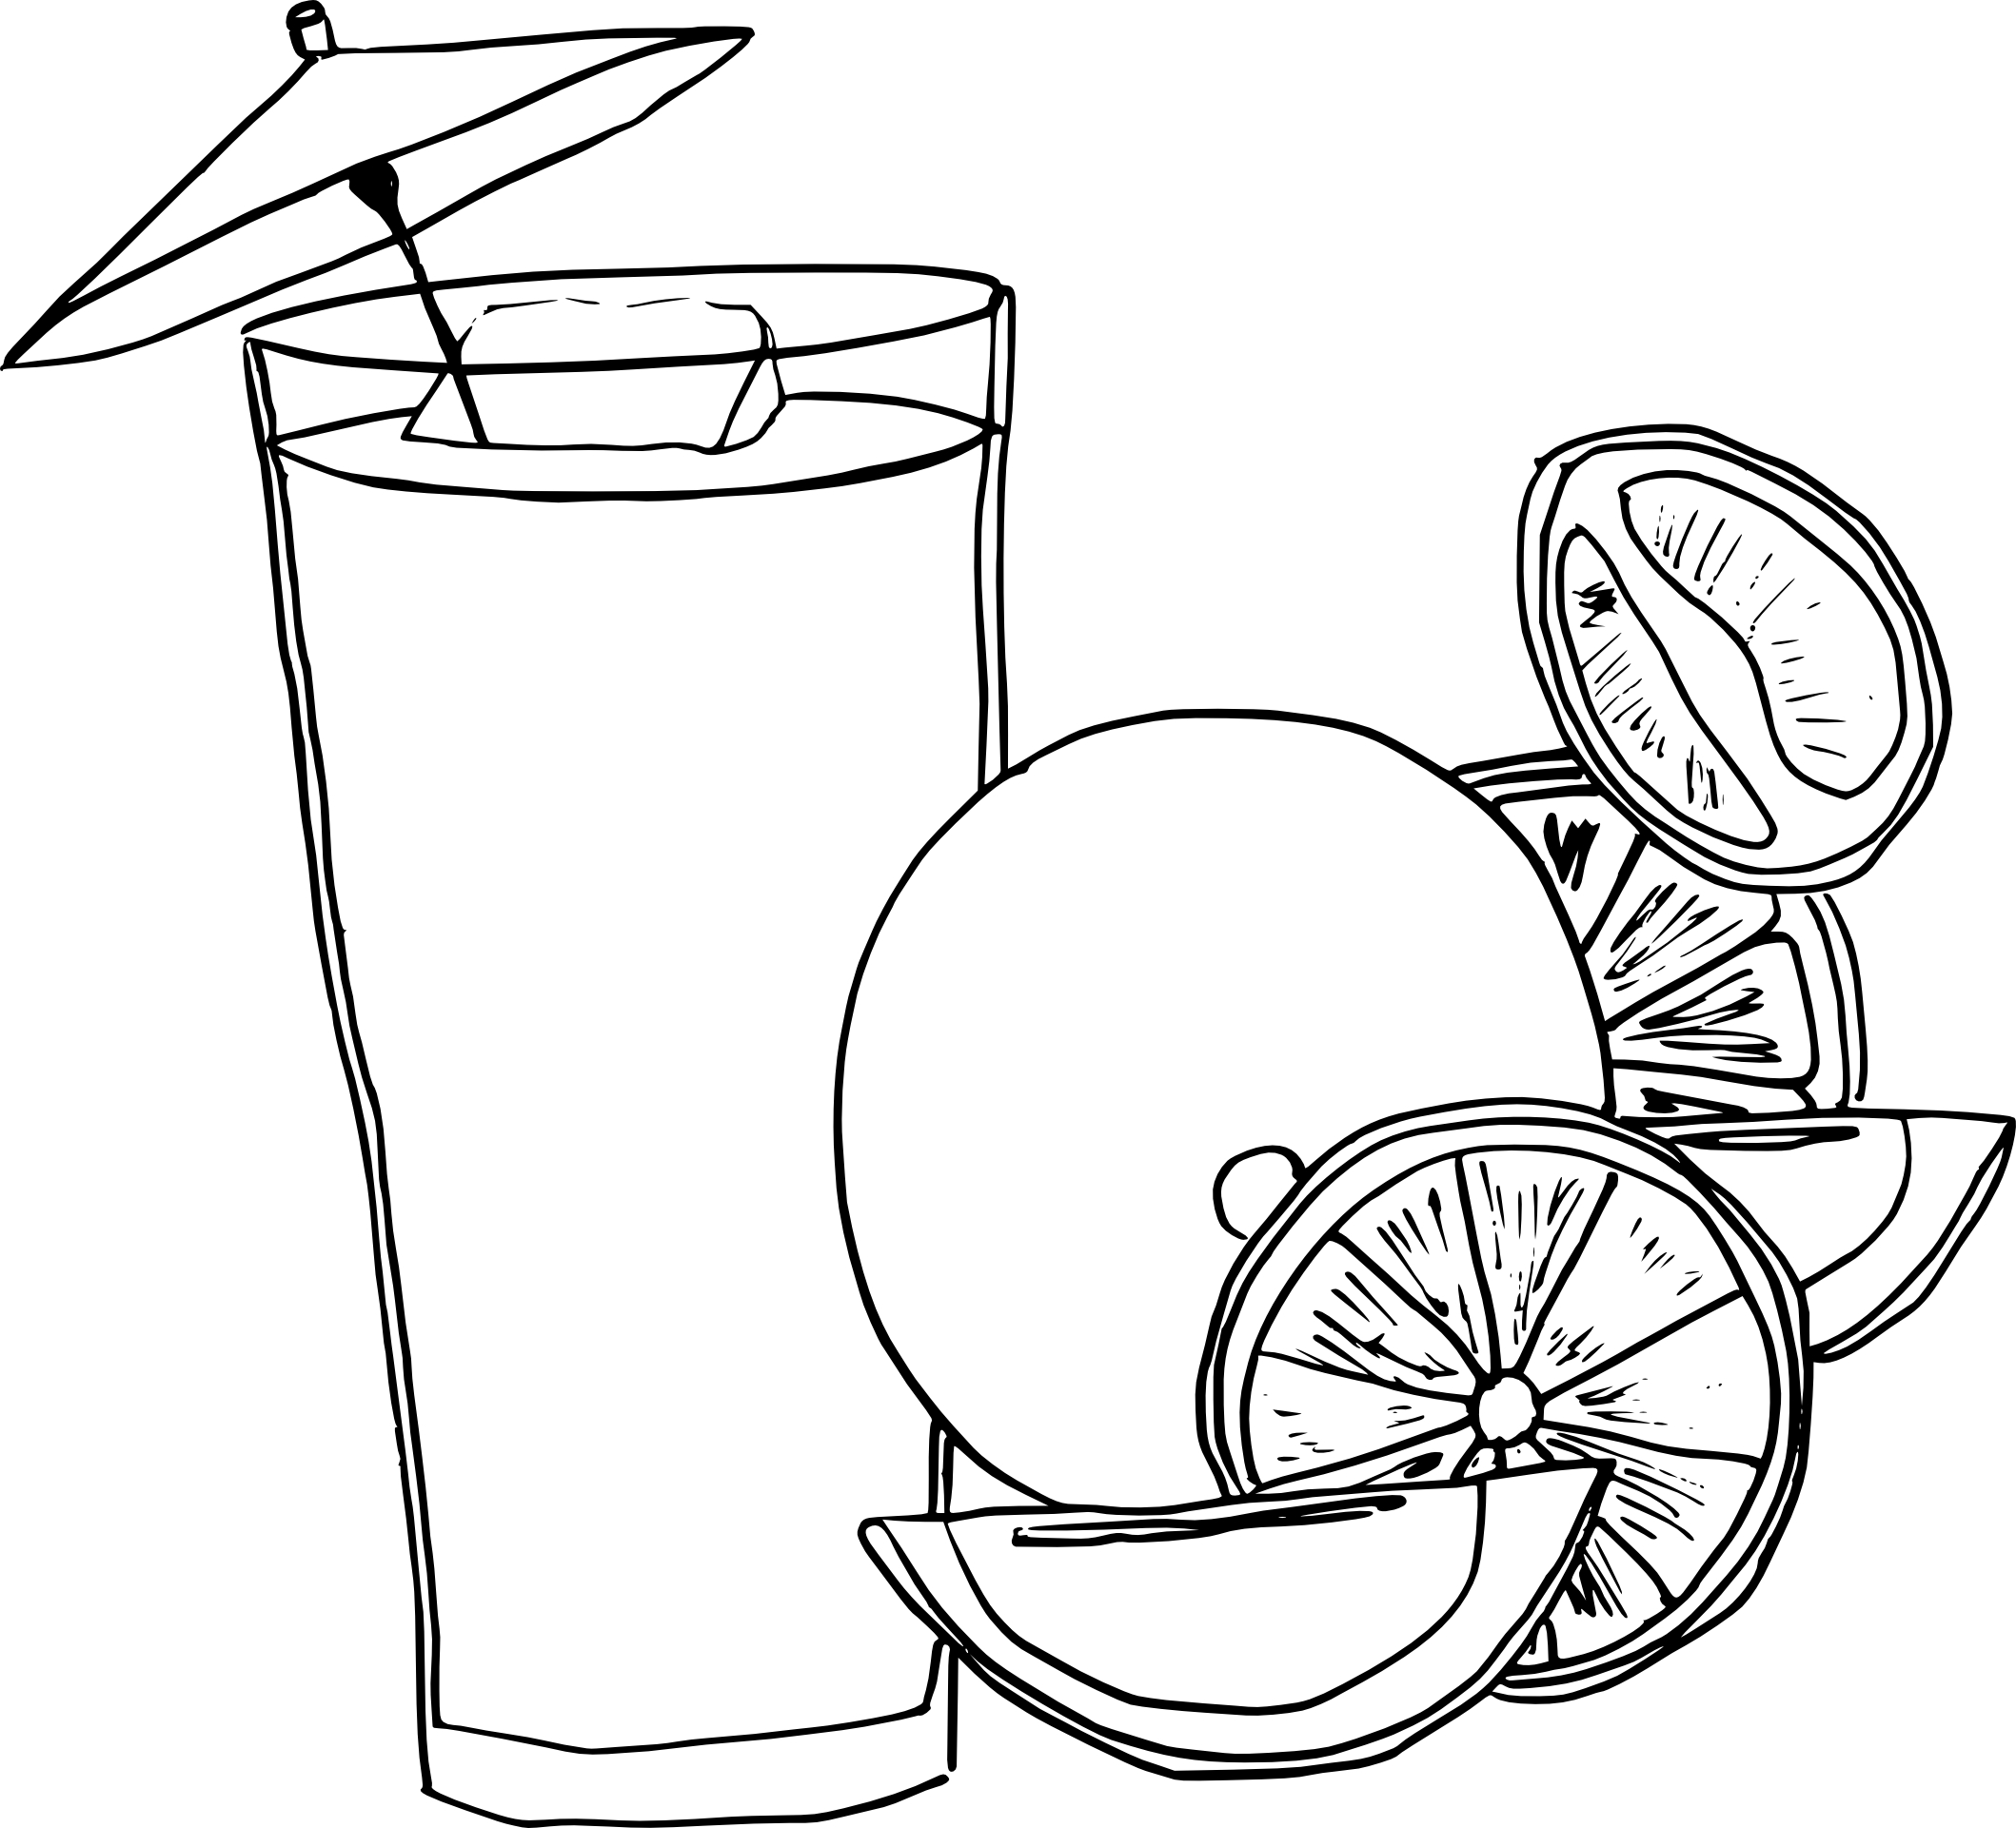 Fruit Juice coloring page